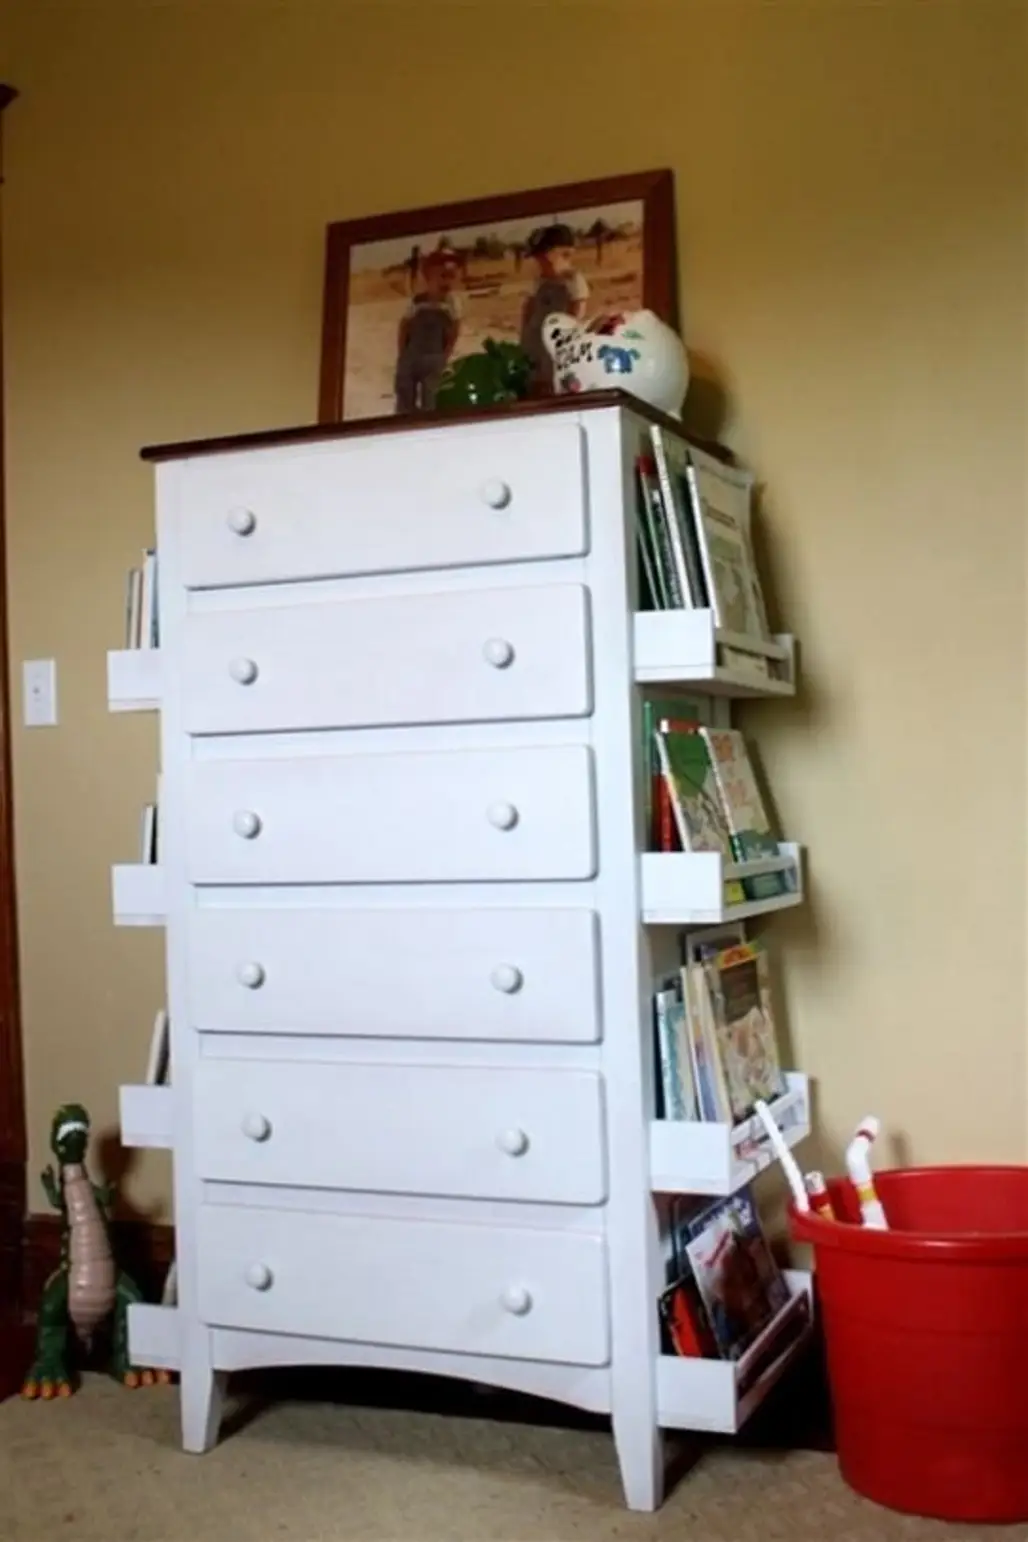 furniture,room,chest of drawers,drawer,product,